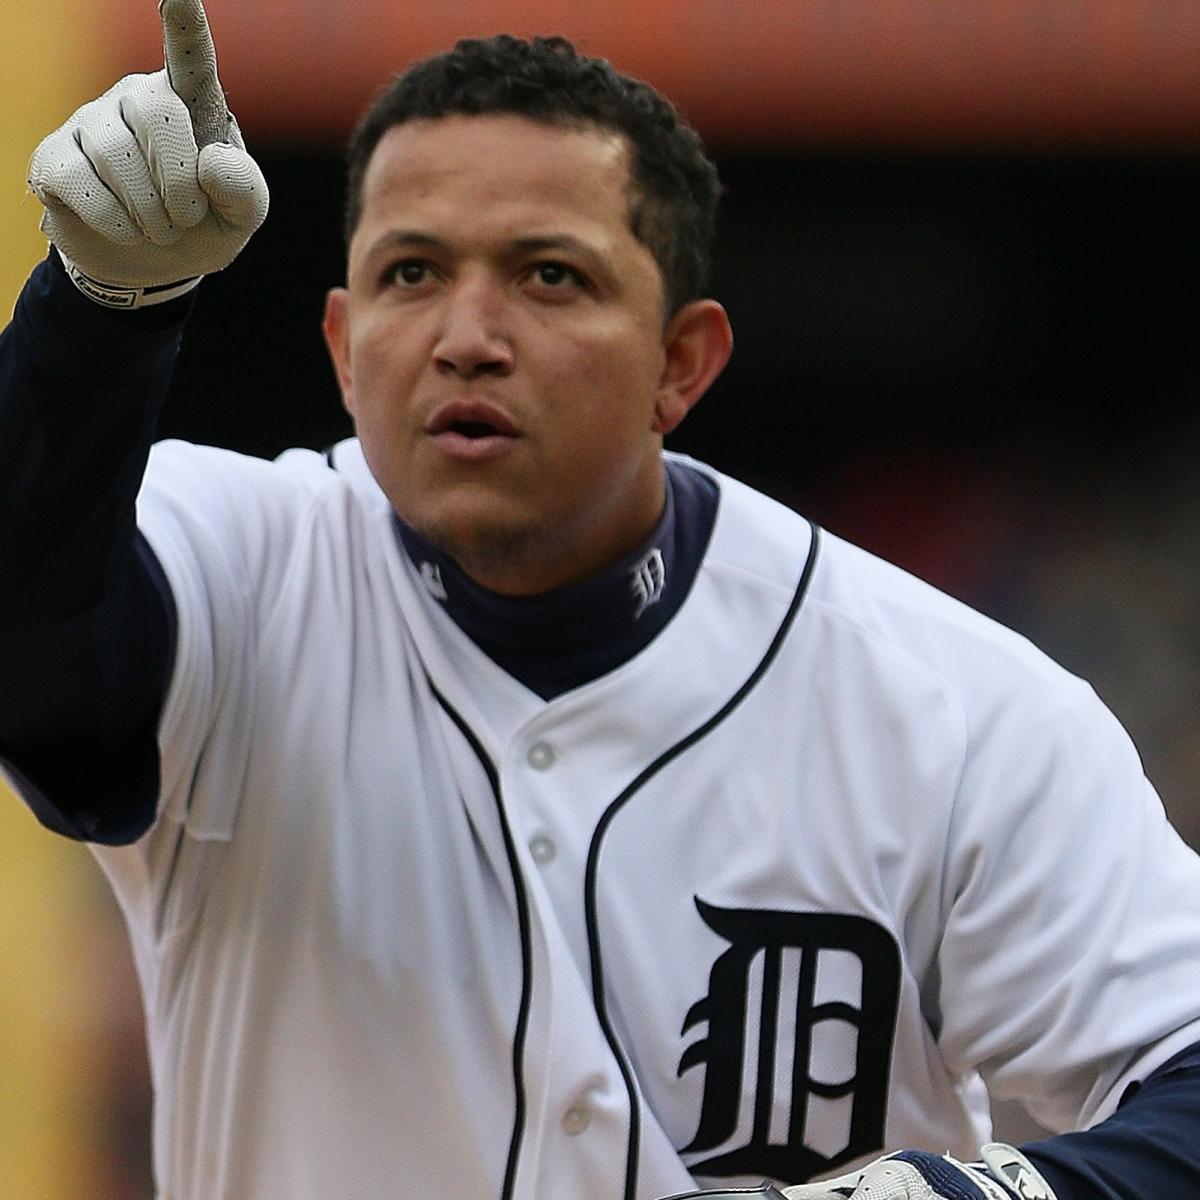 Miguel Cabrera wins Triple Crown 10 years ago, Miguel Cabrera, It's been  just 10 years since Miguel Cabrera locked up the 👑👑👑  #HispanicHeritageMonth, By MLB Network